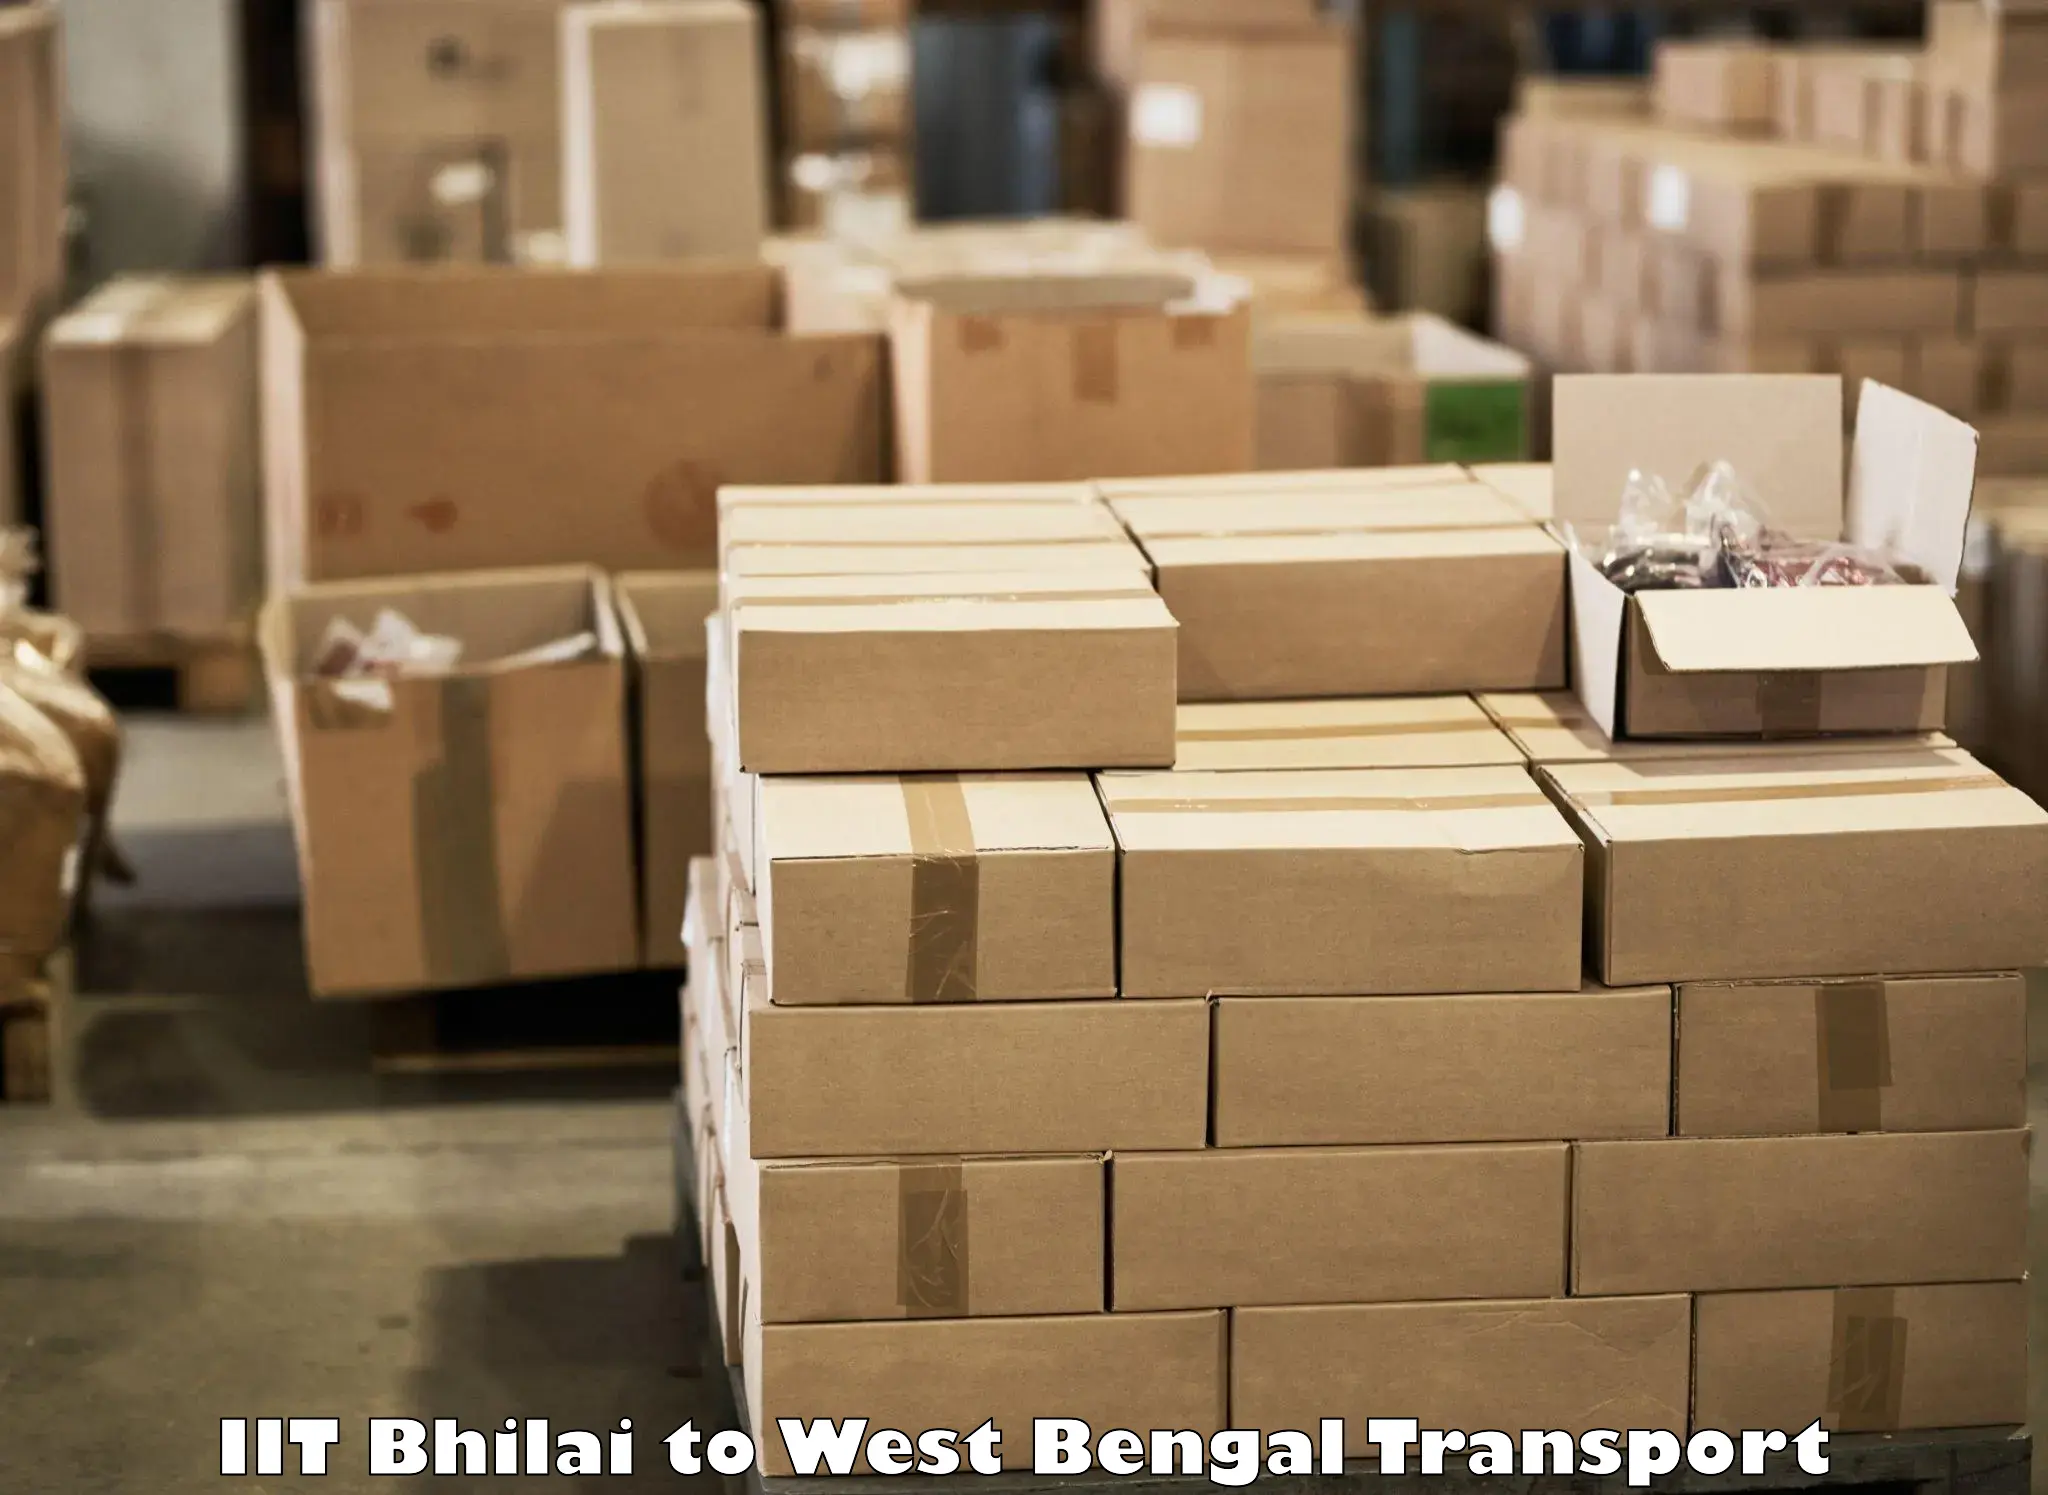 Two wheeler parcel service in IIT Bhilai to IIT Kharagpur